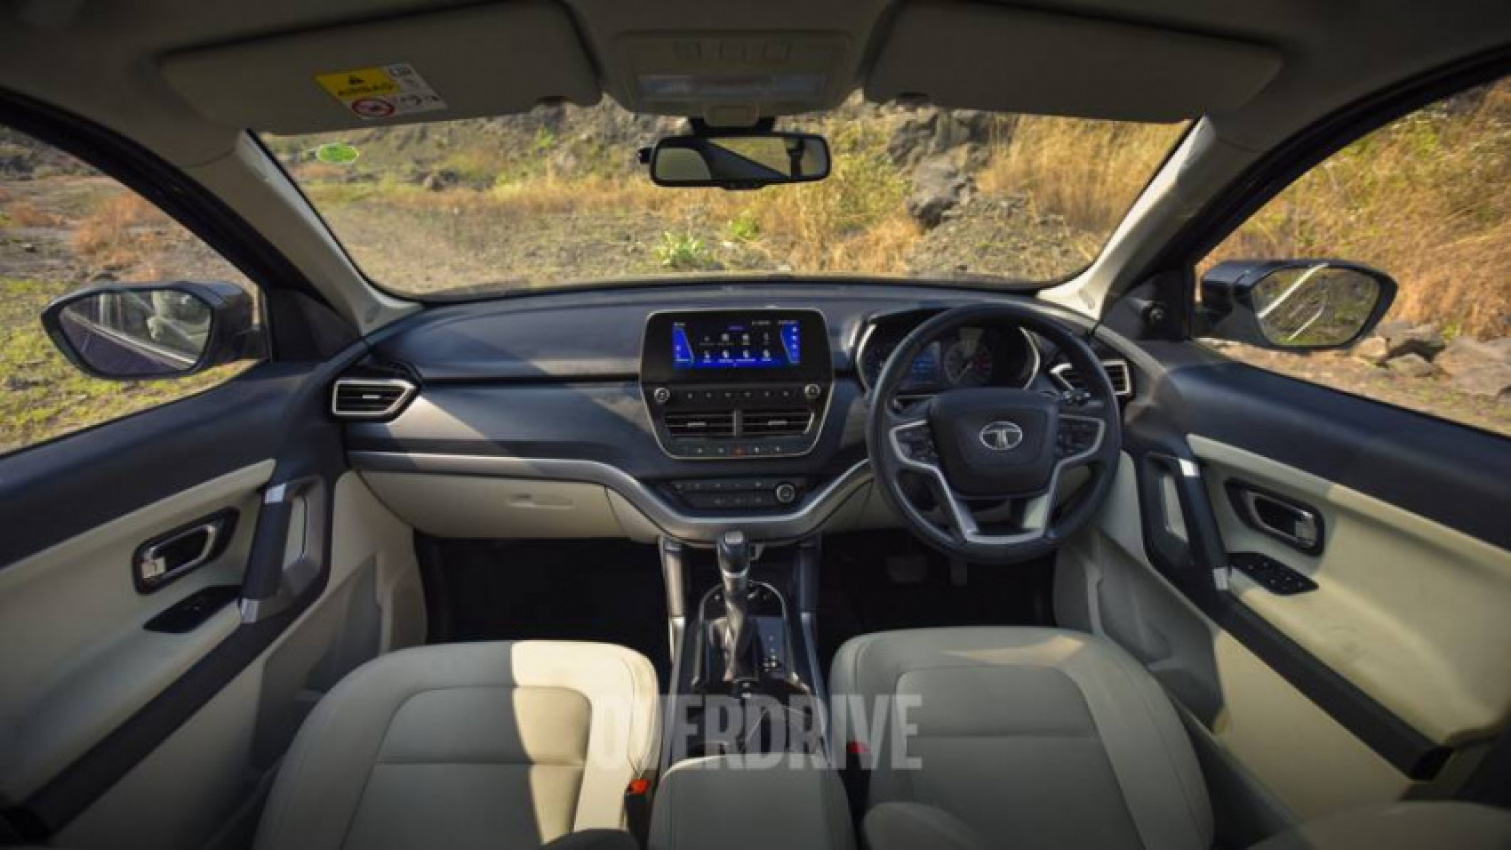 autos, cars, mahindra, reviews, android, best 6 seat suv to buy, best 7 seat suv india, best 7 seat suv to buy, best suv india, mahindra xuv700 vs tata safari, overdrive, safari comparo, xuv700 comparo, xuv700 vs safari, xuv700 vs safari comparison, xuv700 vs safari comparison review, xuv700 vs safari comparo, android, mahindra xuv700 vs tata safari comparison review